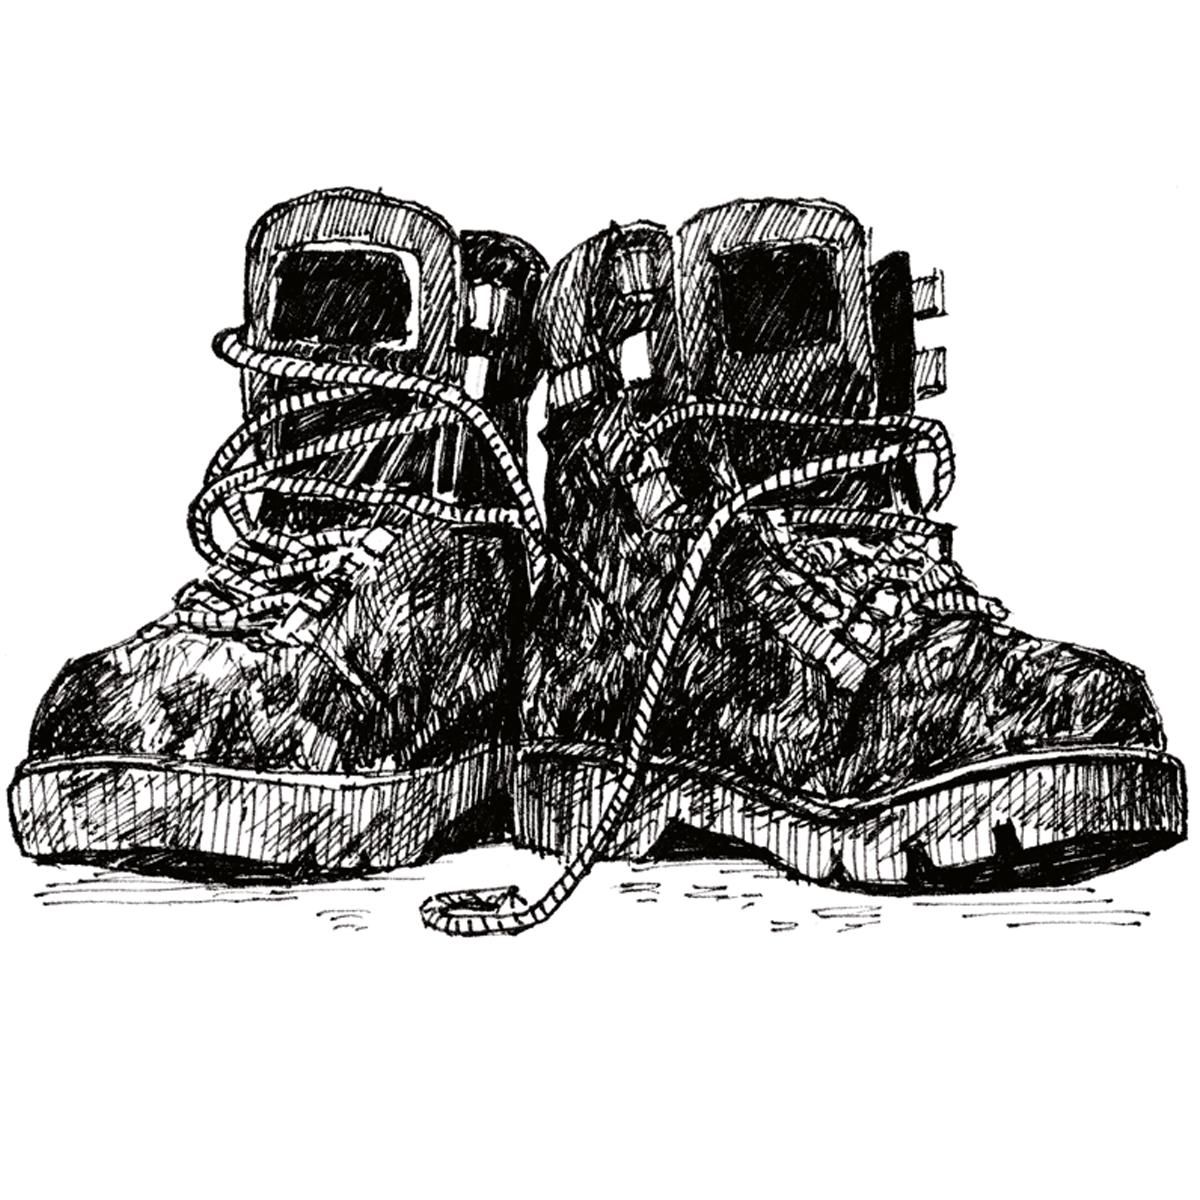 Limited edition print from pen and ink drawing of a pair of muddy walking boots